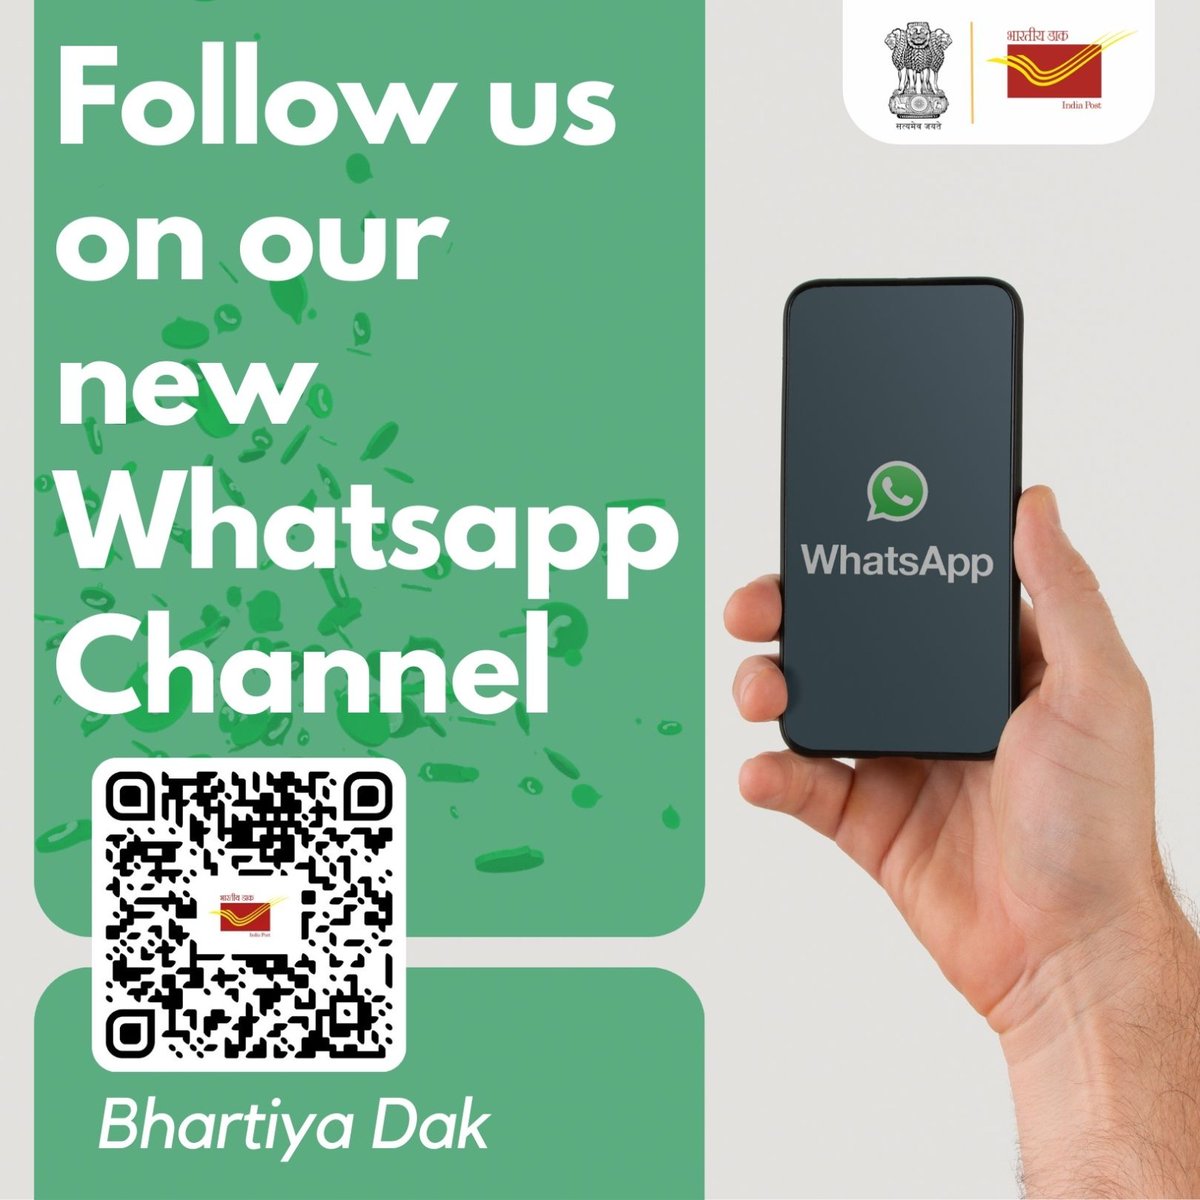 Stay connected with the latest updates! Join our WhatsApp channel today. Click to join now: whatsapp.com/channel/0029Va… #JoinUs #WhatsAppChannel #StayConnected